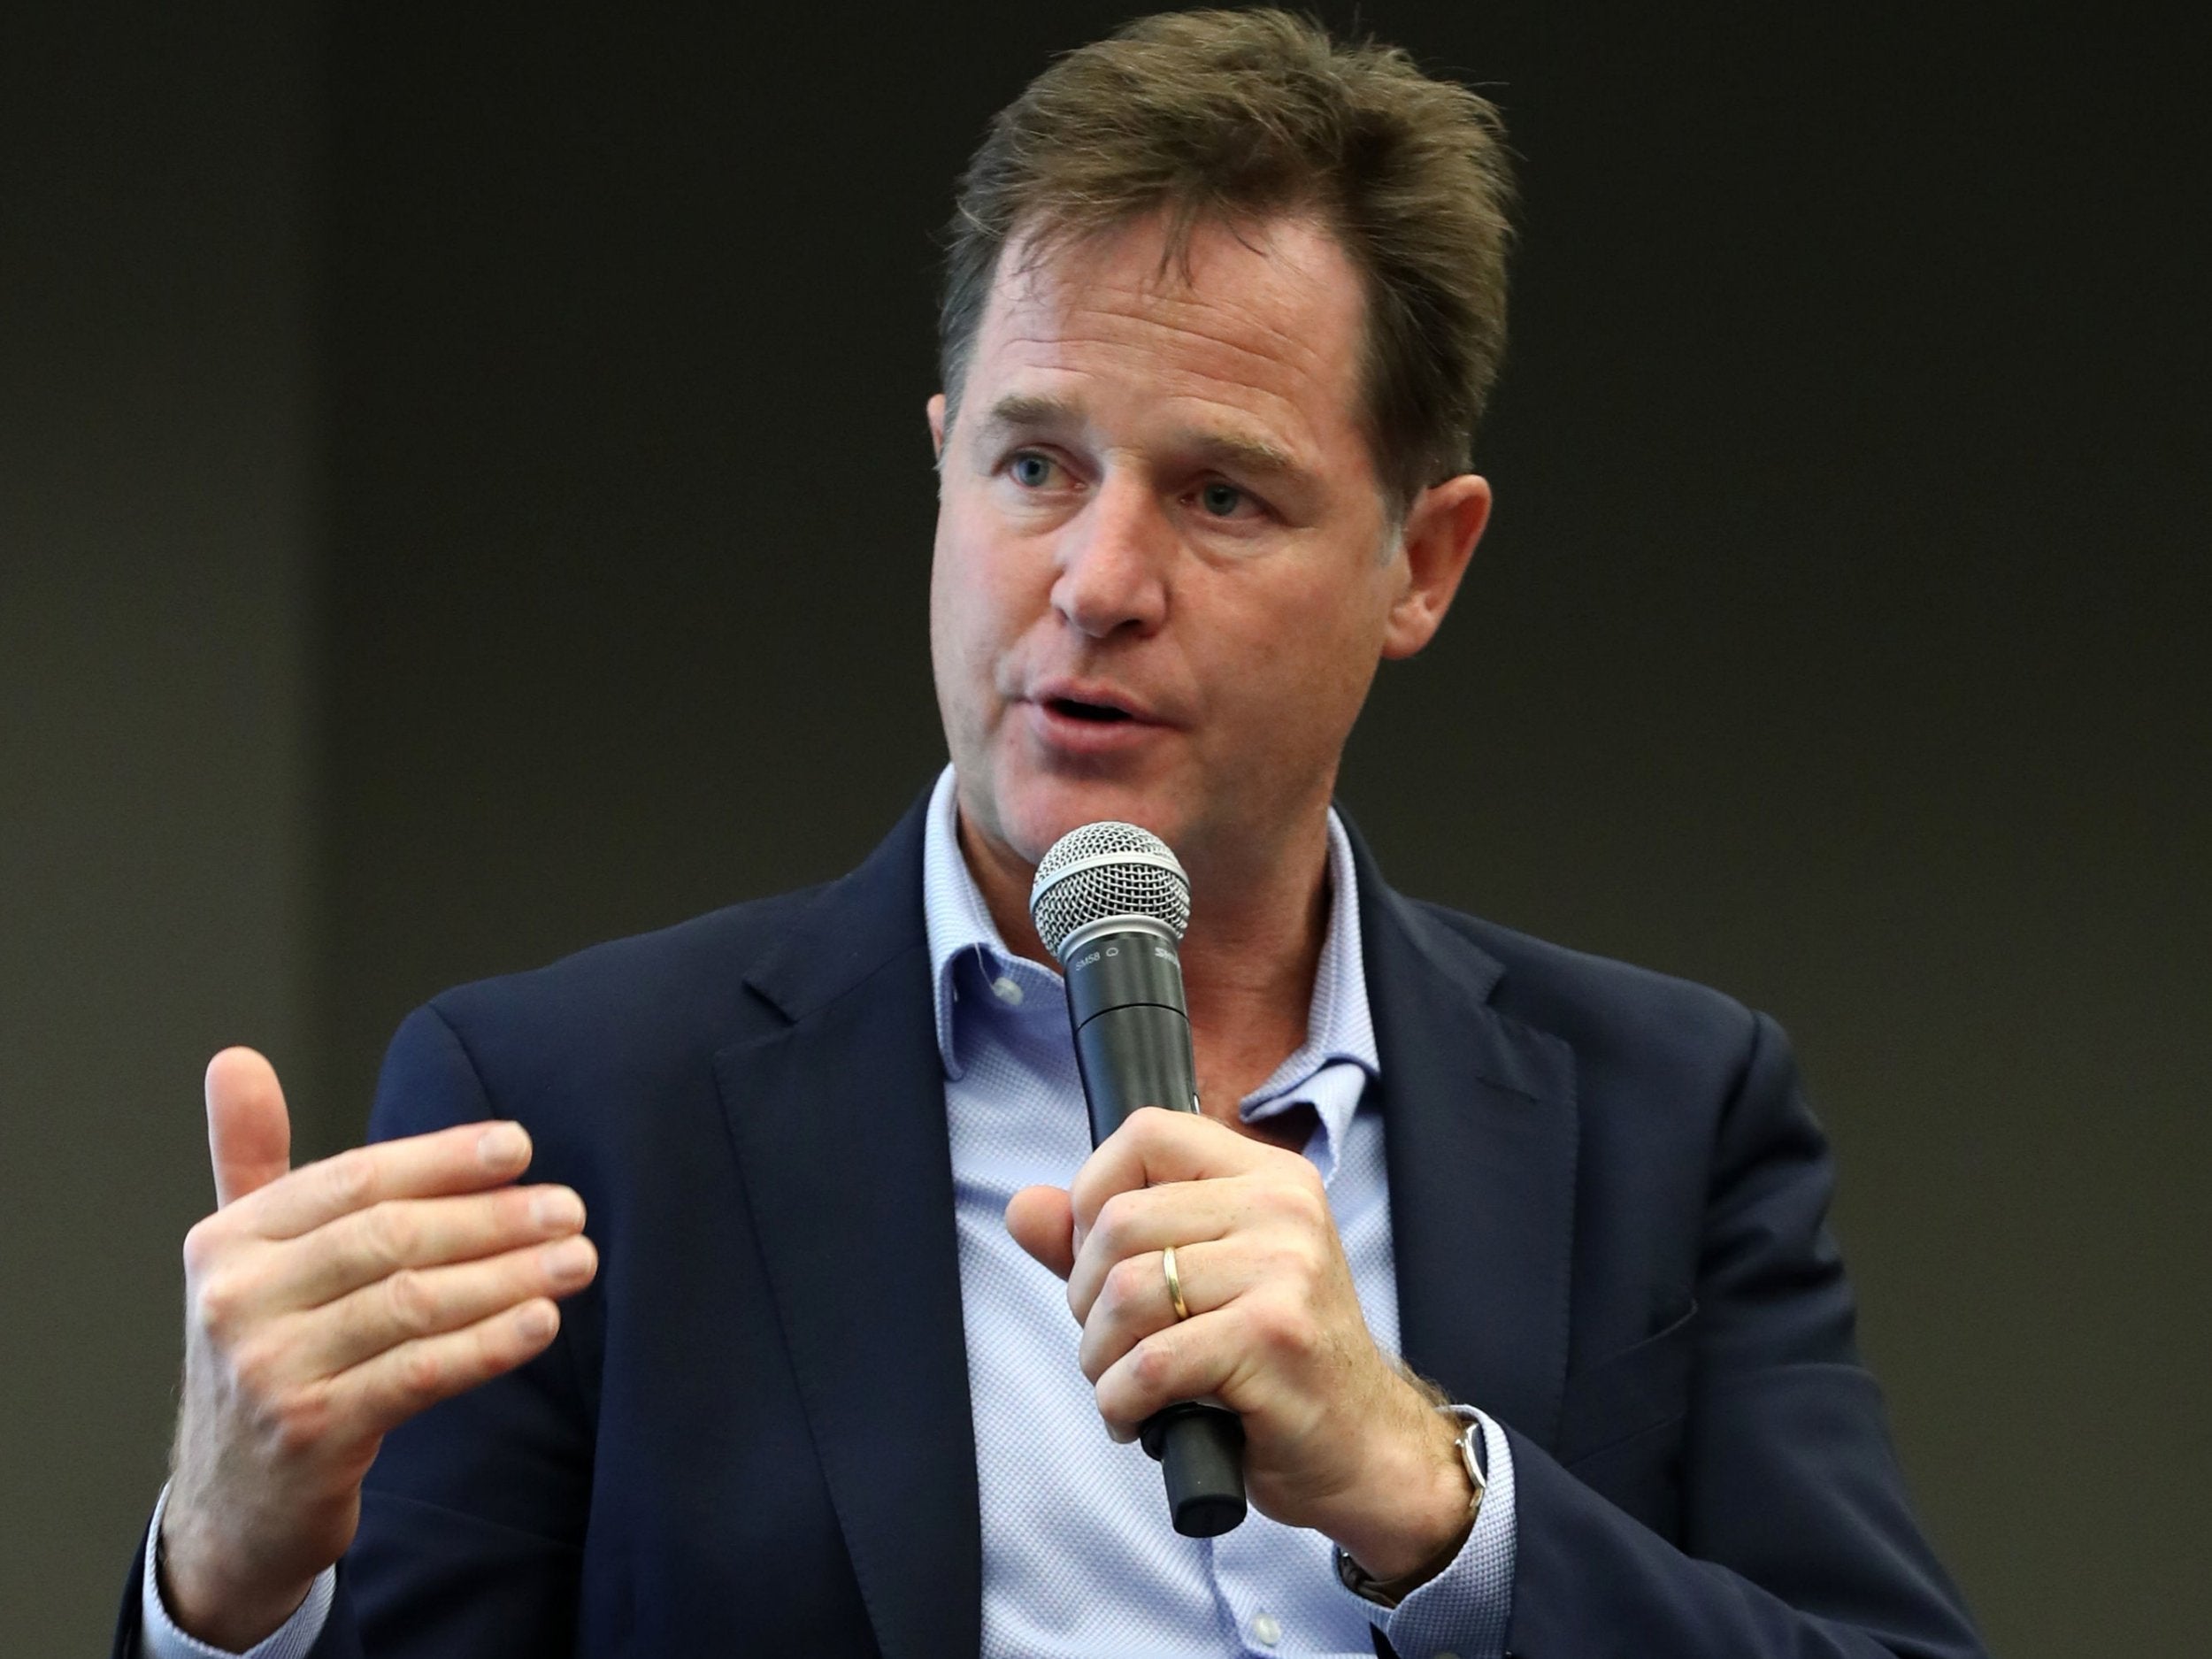 Sir Nick Clegg at a fringe event during the Liberal Democrats' annual conference in Brighton